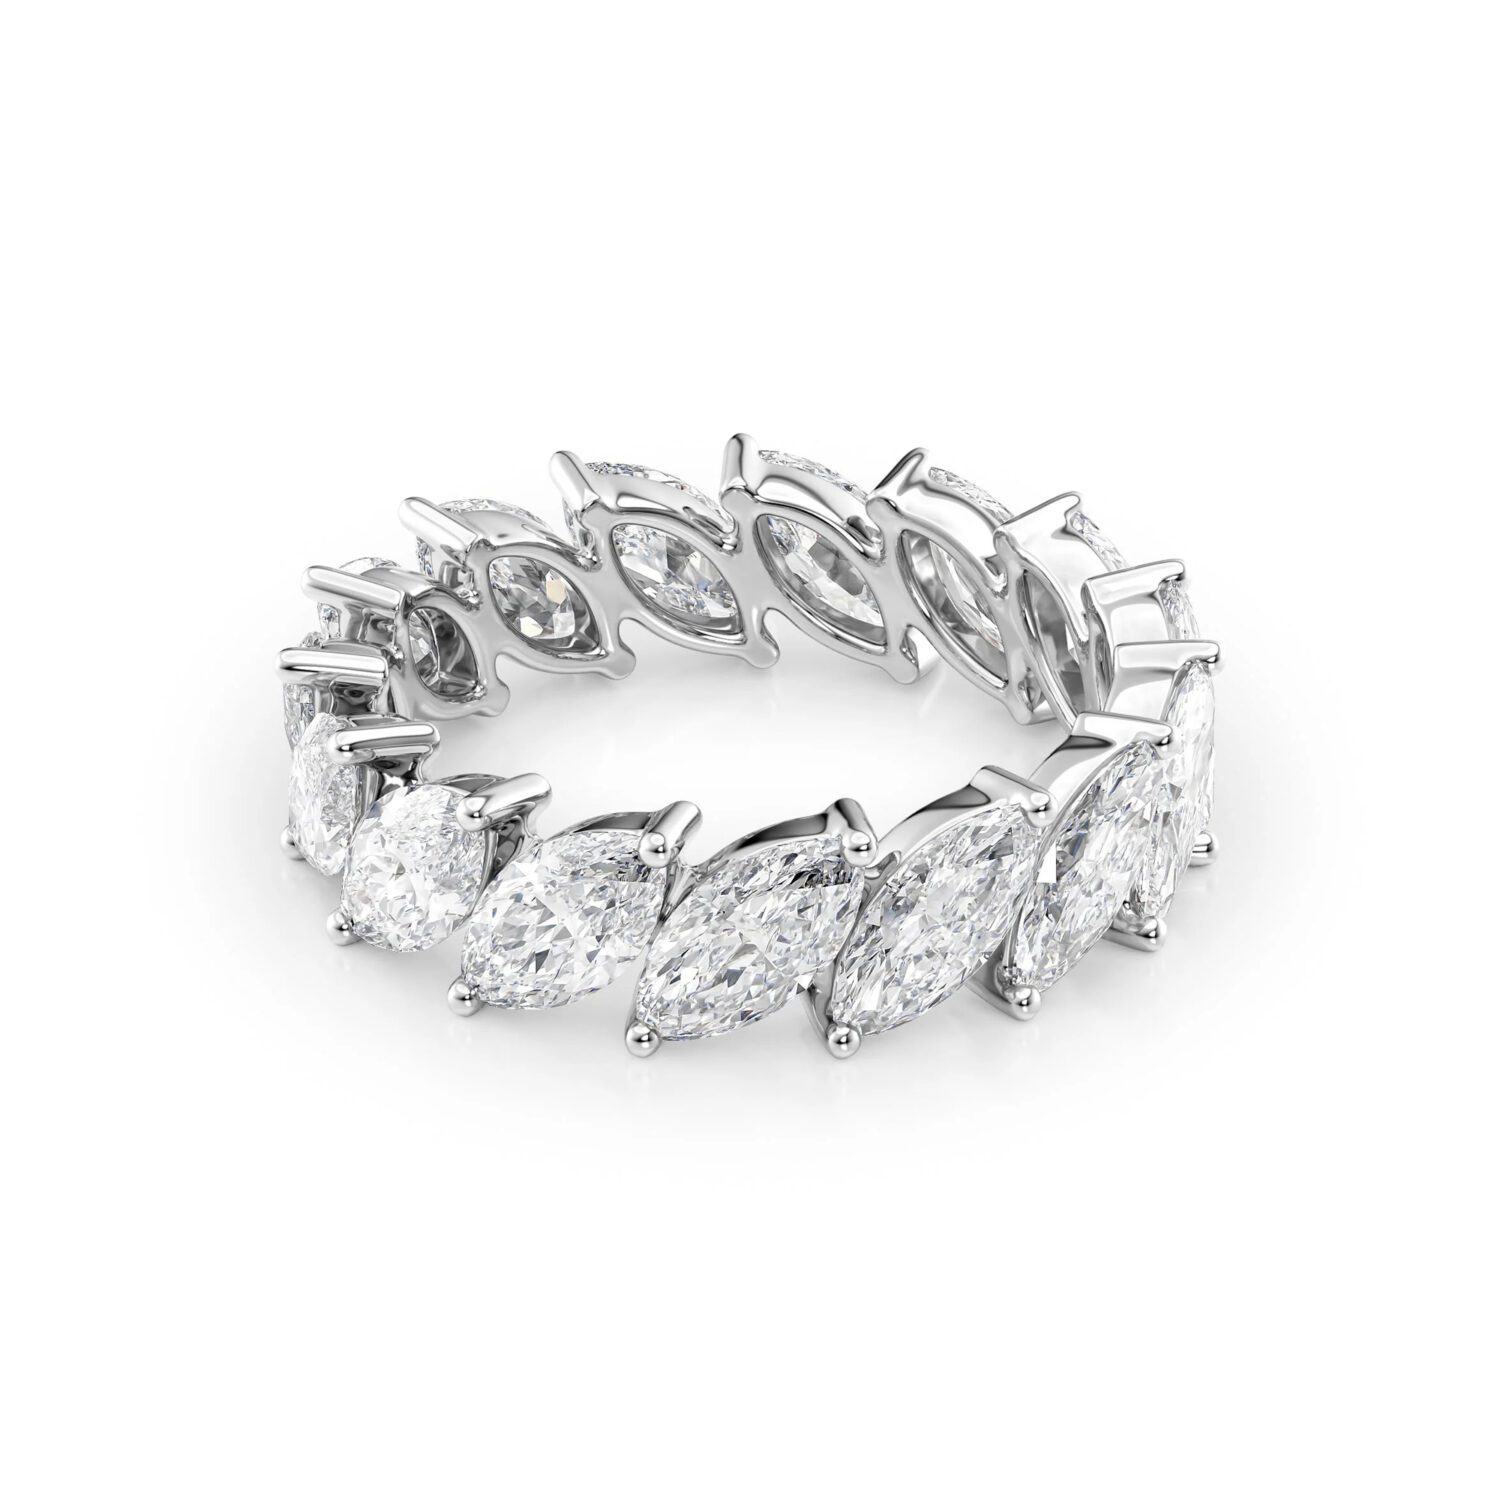 Lab grown diamonds in Cyprus - The Tilted Marquis Cut 1.5ct/ 2ct/ 3ct/ 3.5ct or 5ct Full Eternity Band Diamond Ring best quality and price